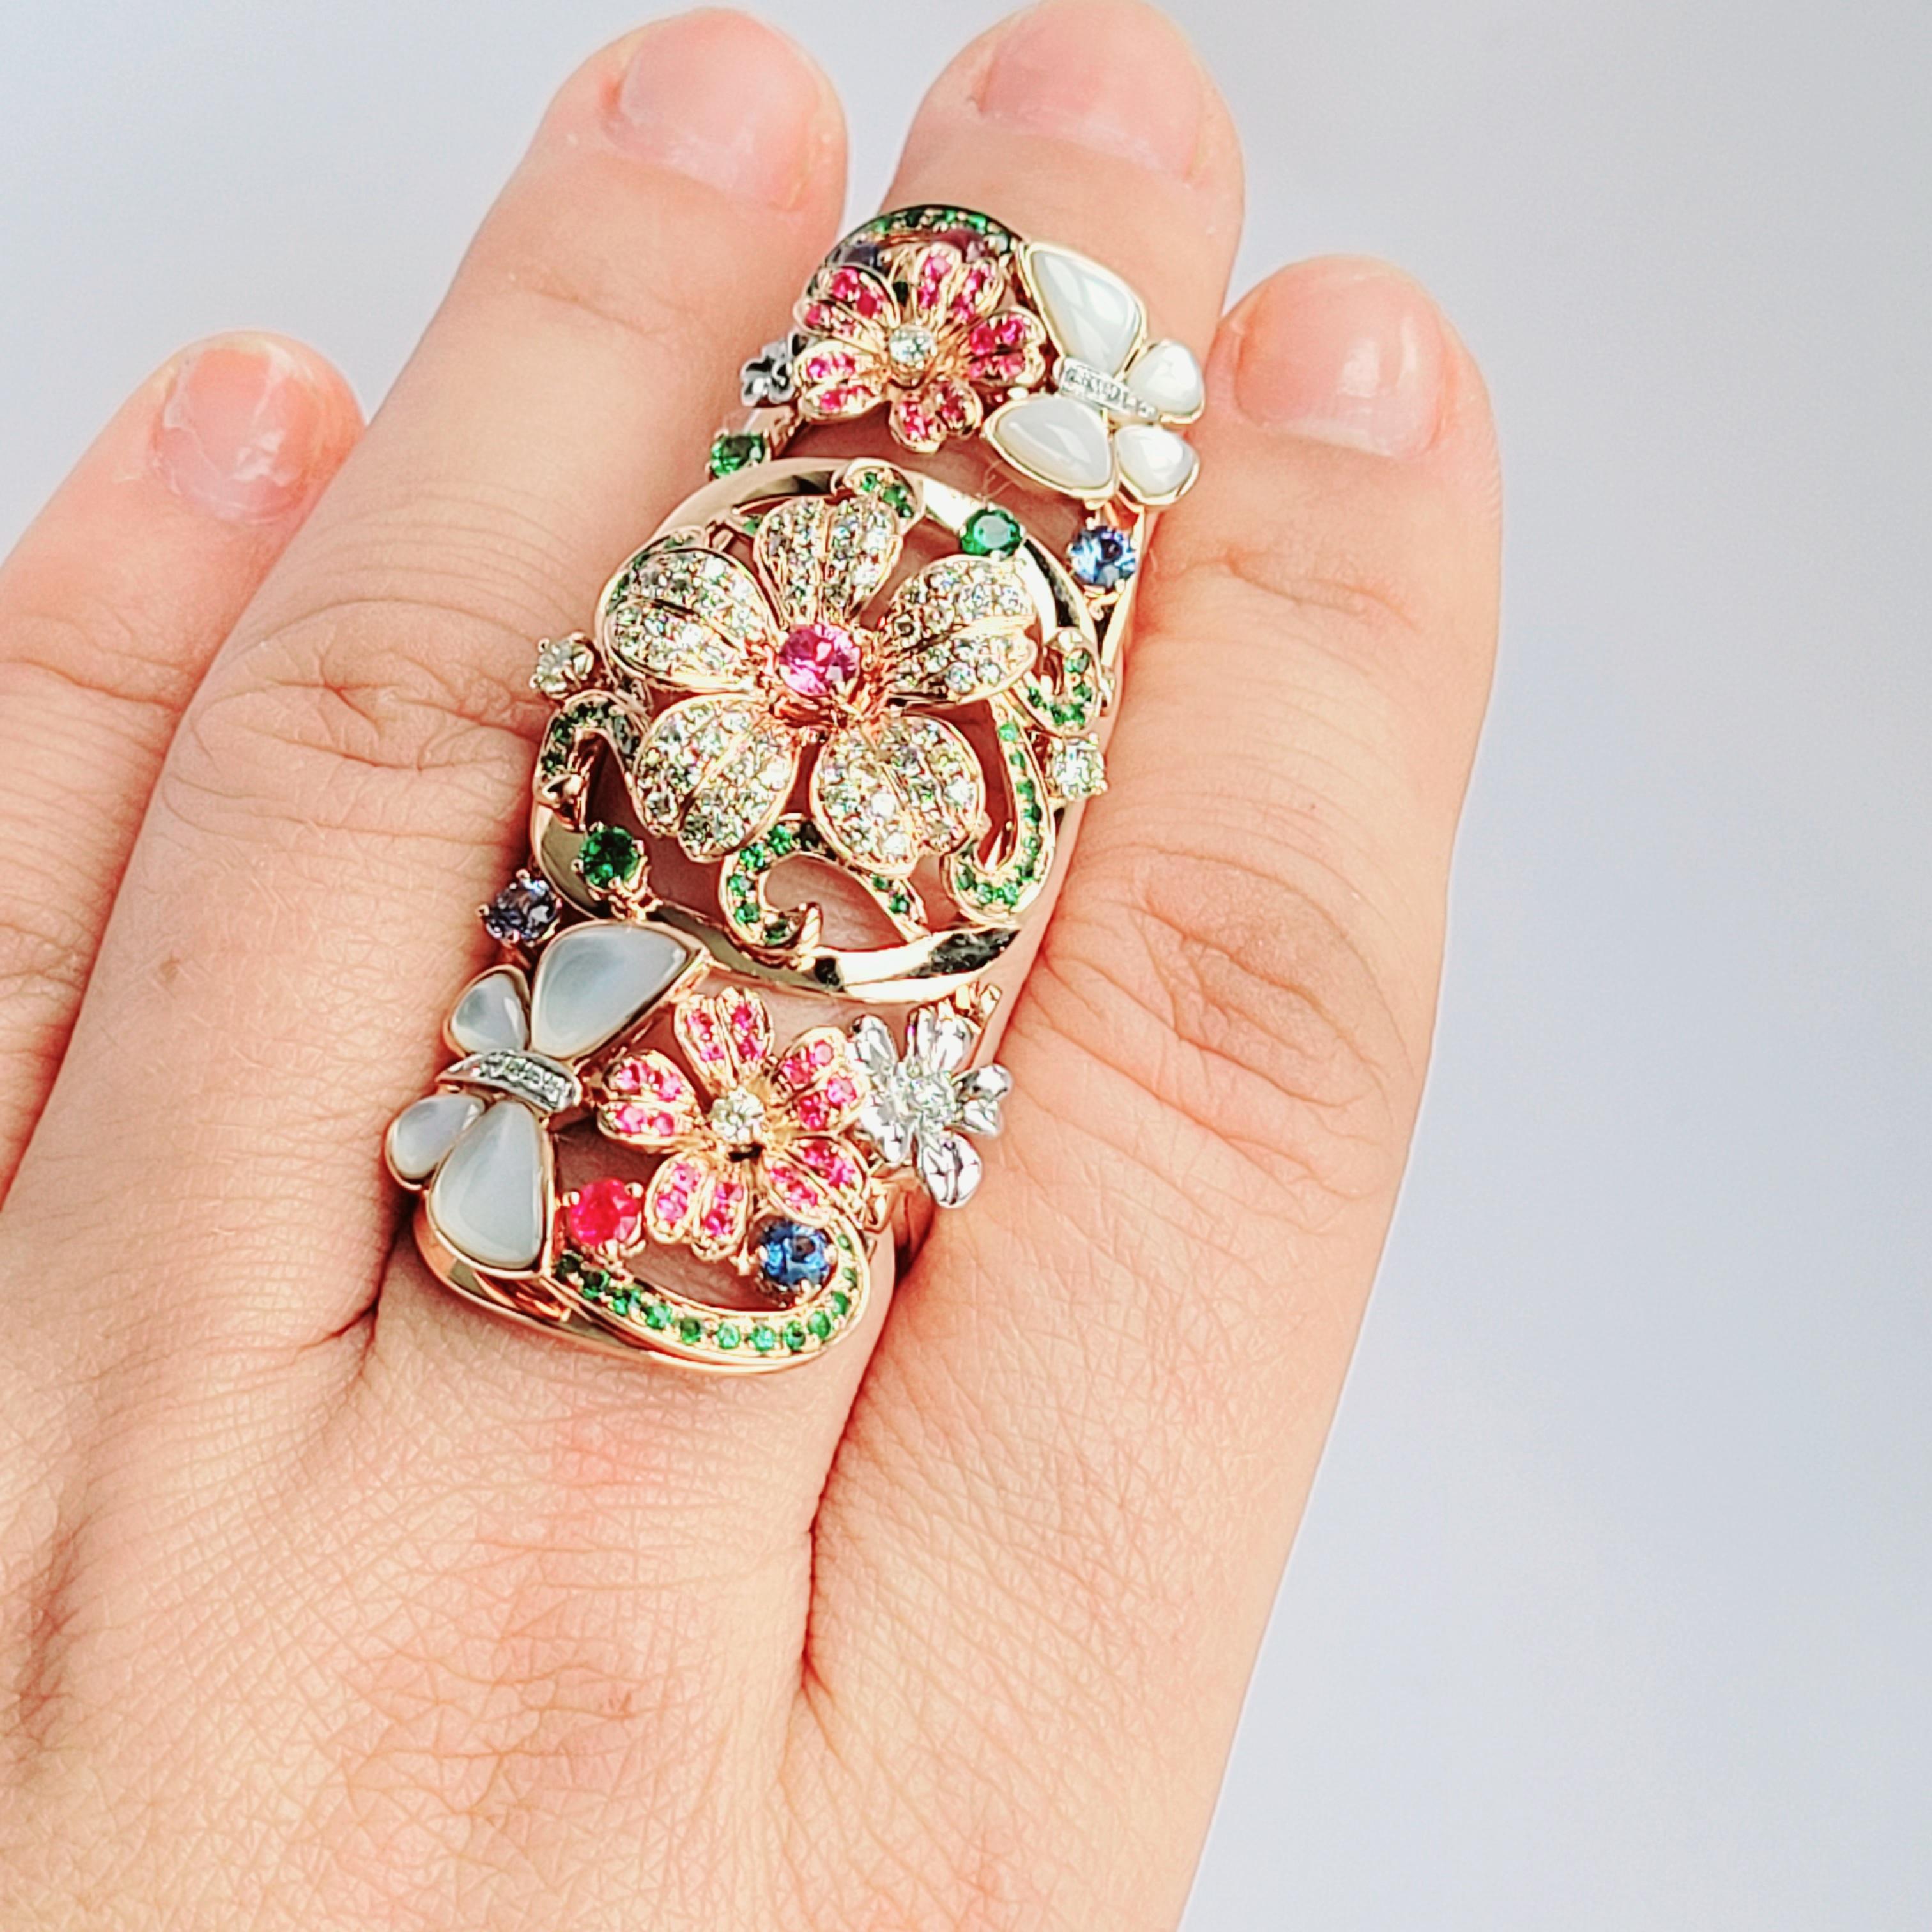 Its one a of kind Ring that will enhance all your beauty and let you dream away! It has pink sapphitre

Ring with Multi Color Sapphire and Pearls
81 Round Diamonds- 0.80 CT
8 White Shell - 2.41 CT
149 Round Mixed Sapphires - 2.33 CT
18K ROSE GOLD -